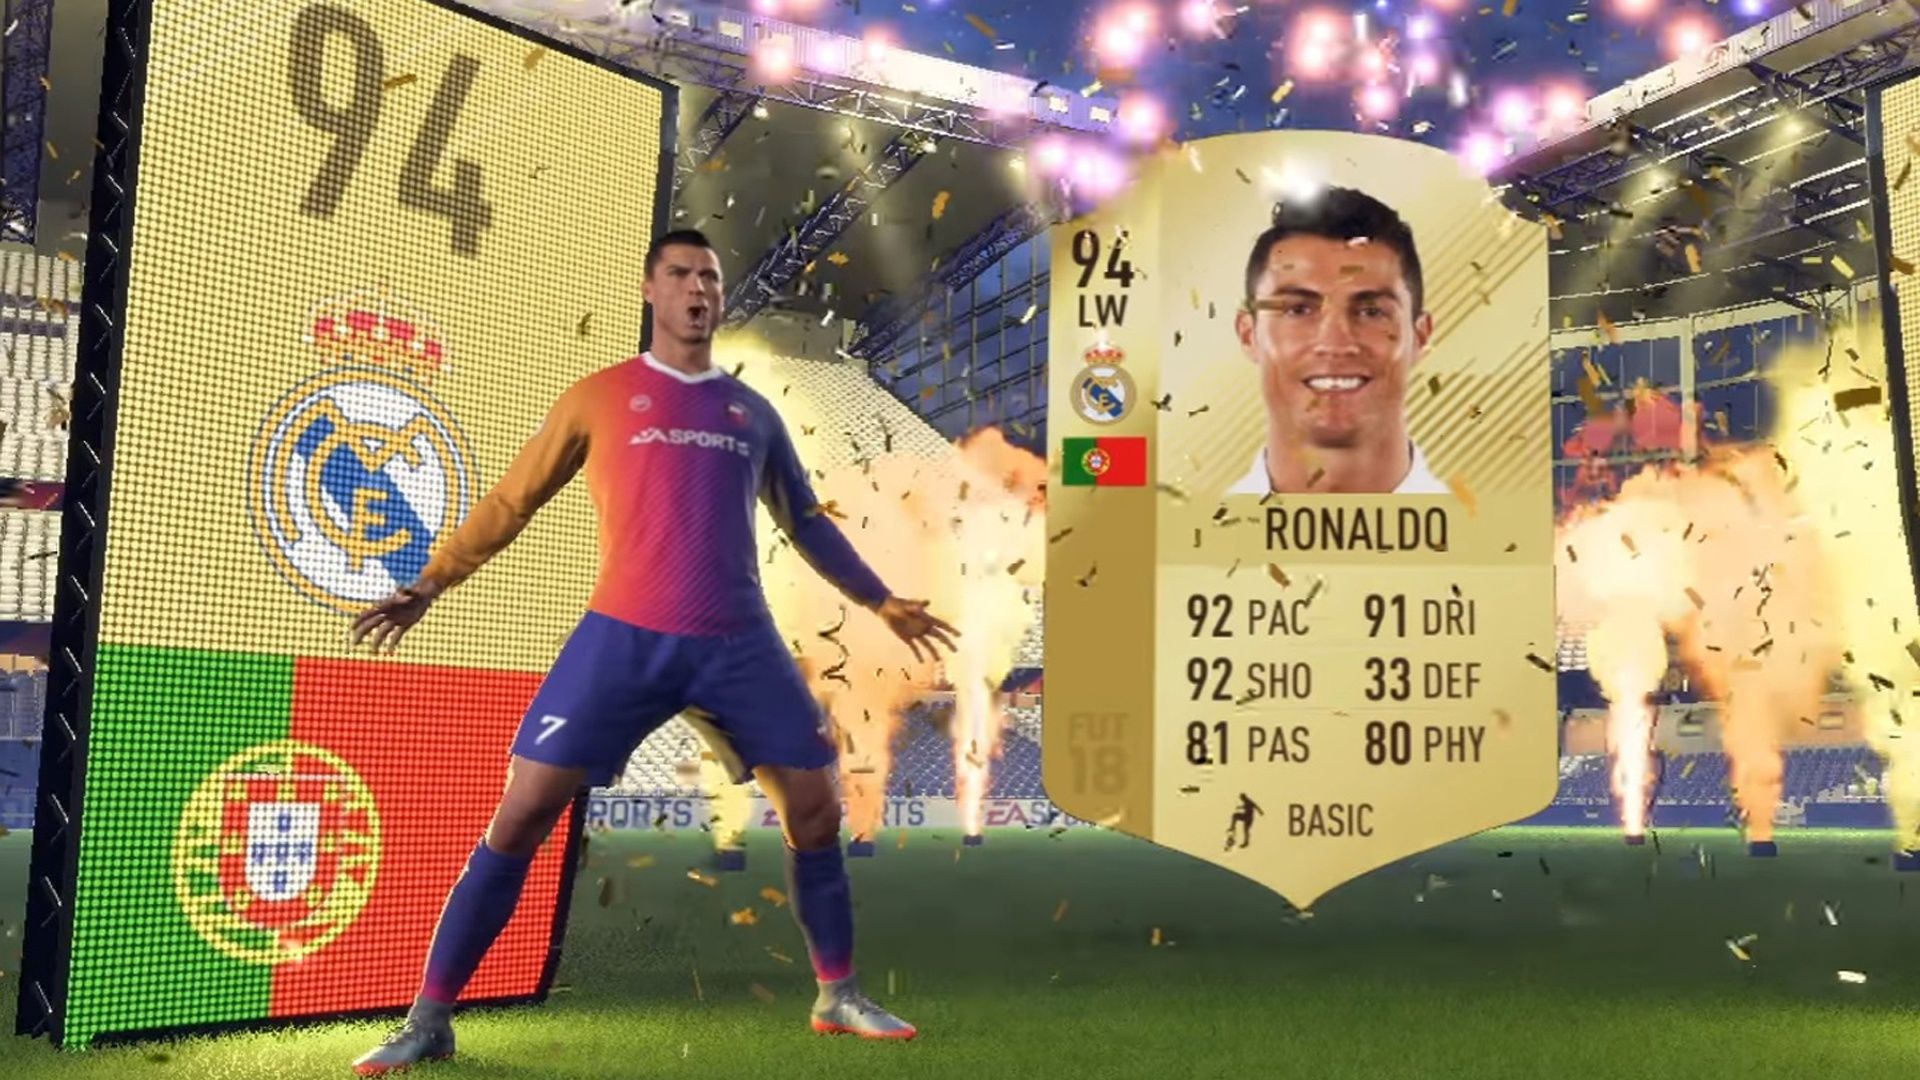 FIFA 19 Ultimate Team guide: getting started, tips and all the new features